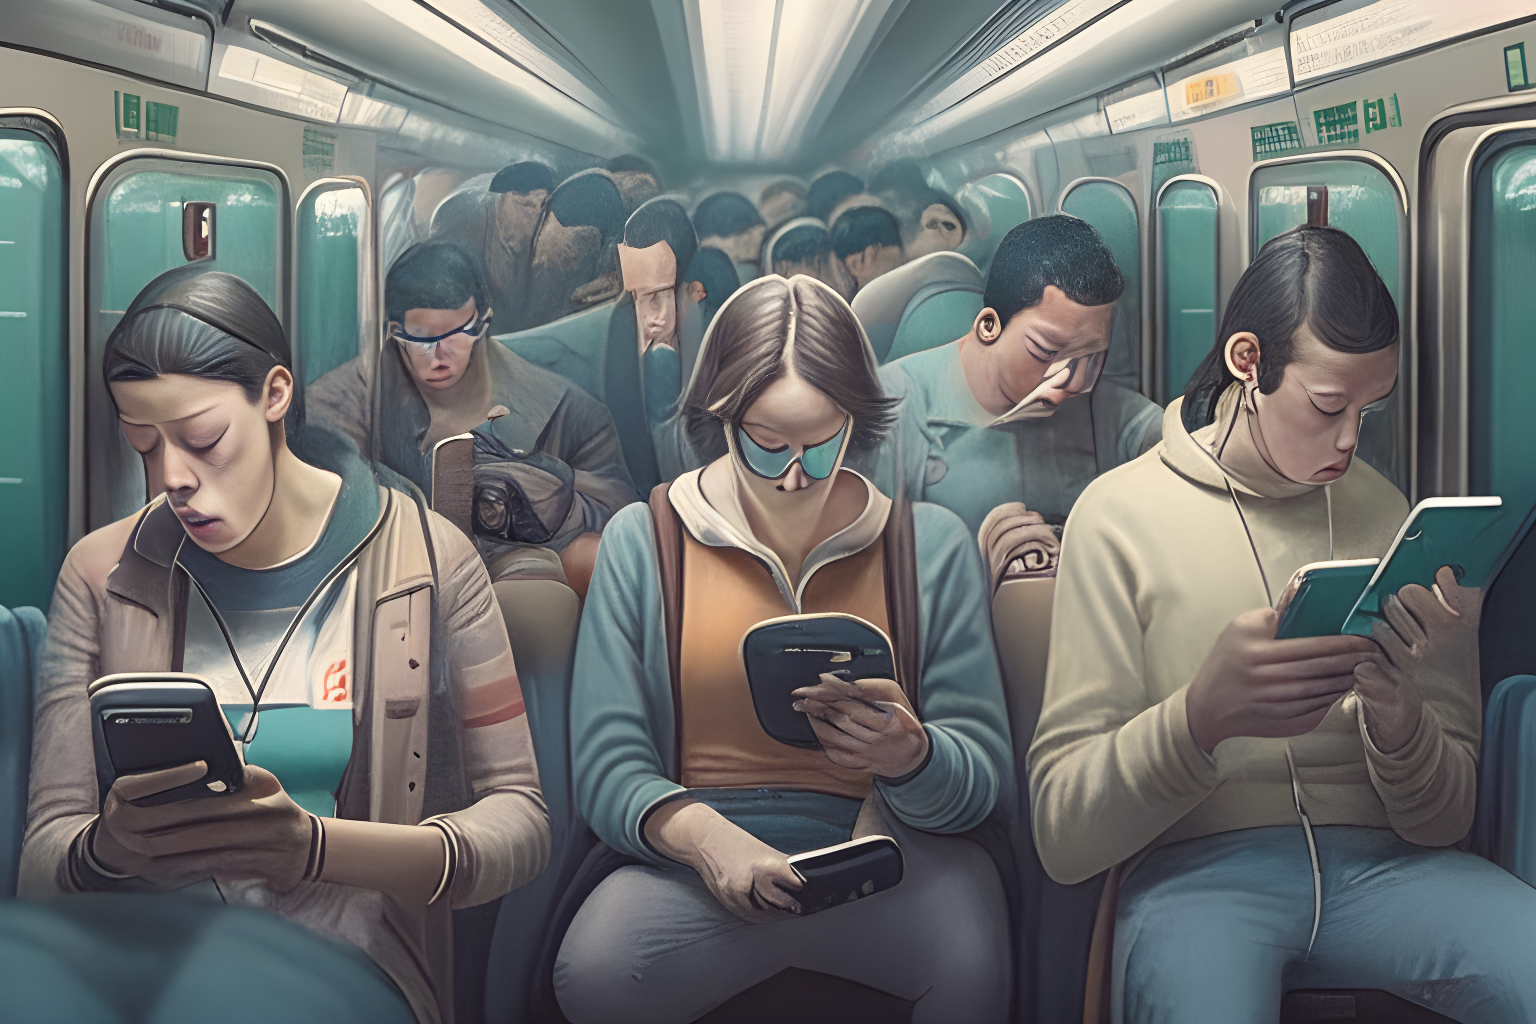 A subway train full of people using their phones